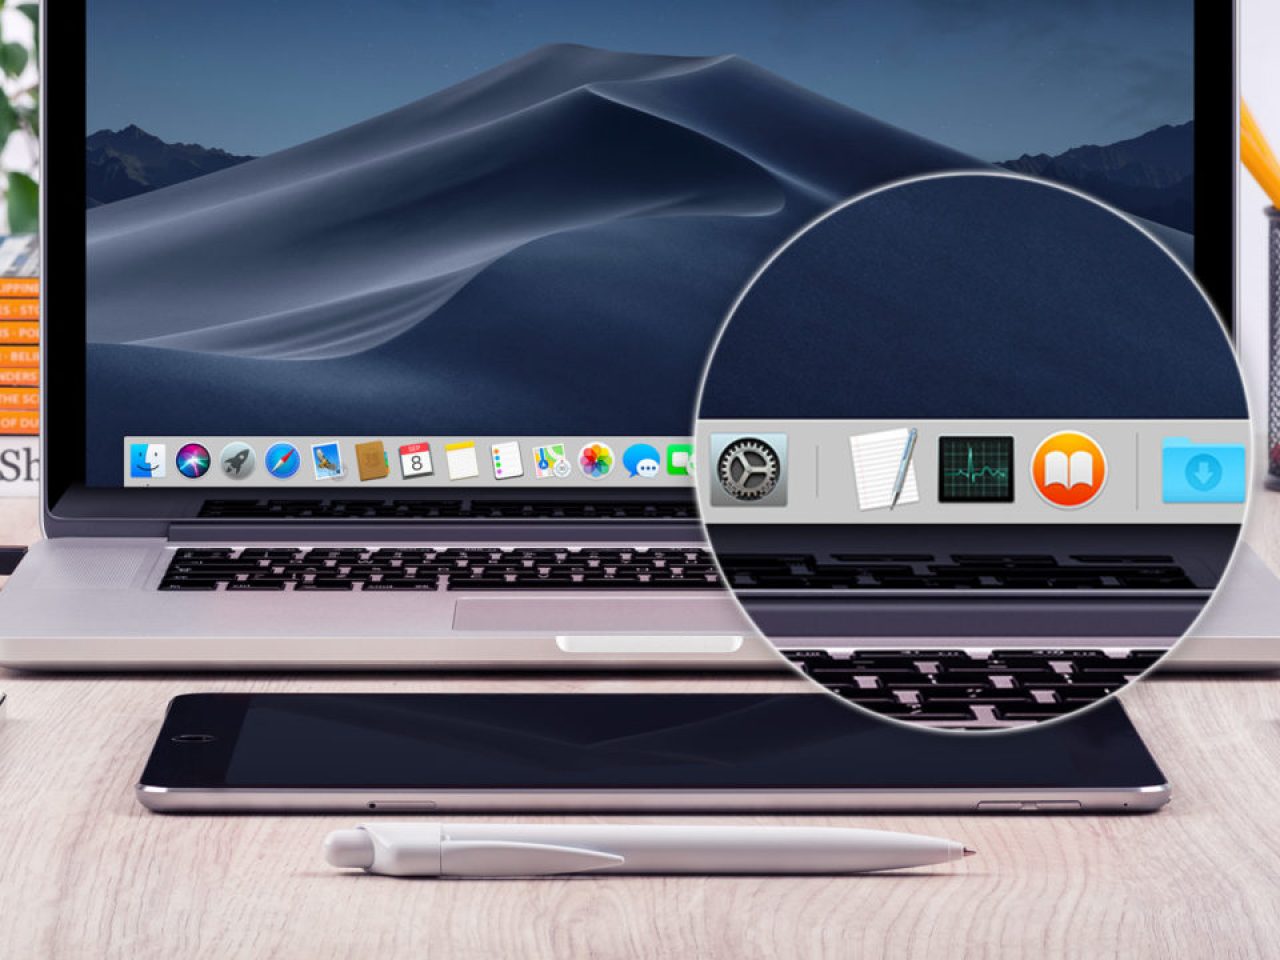 Customize The Dock’s Location